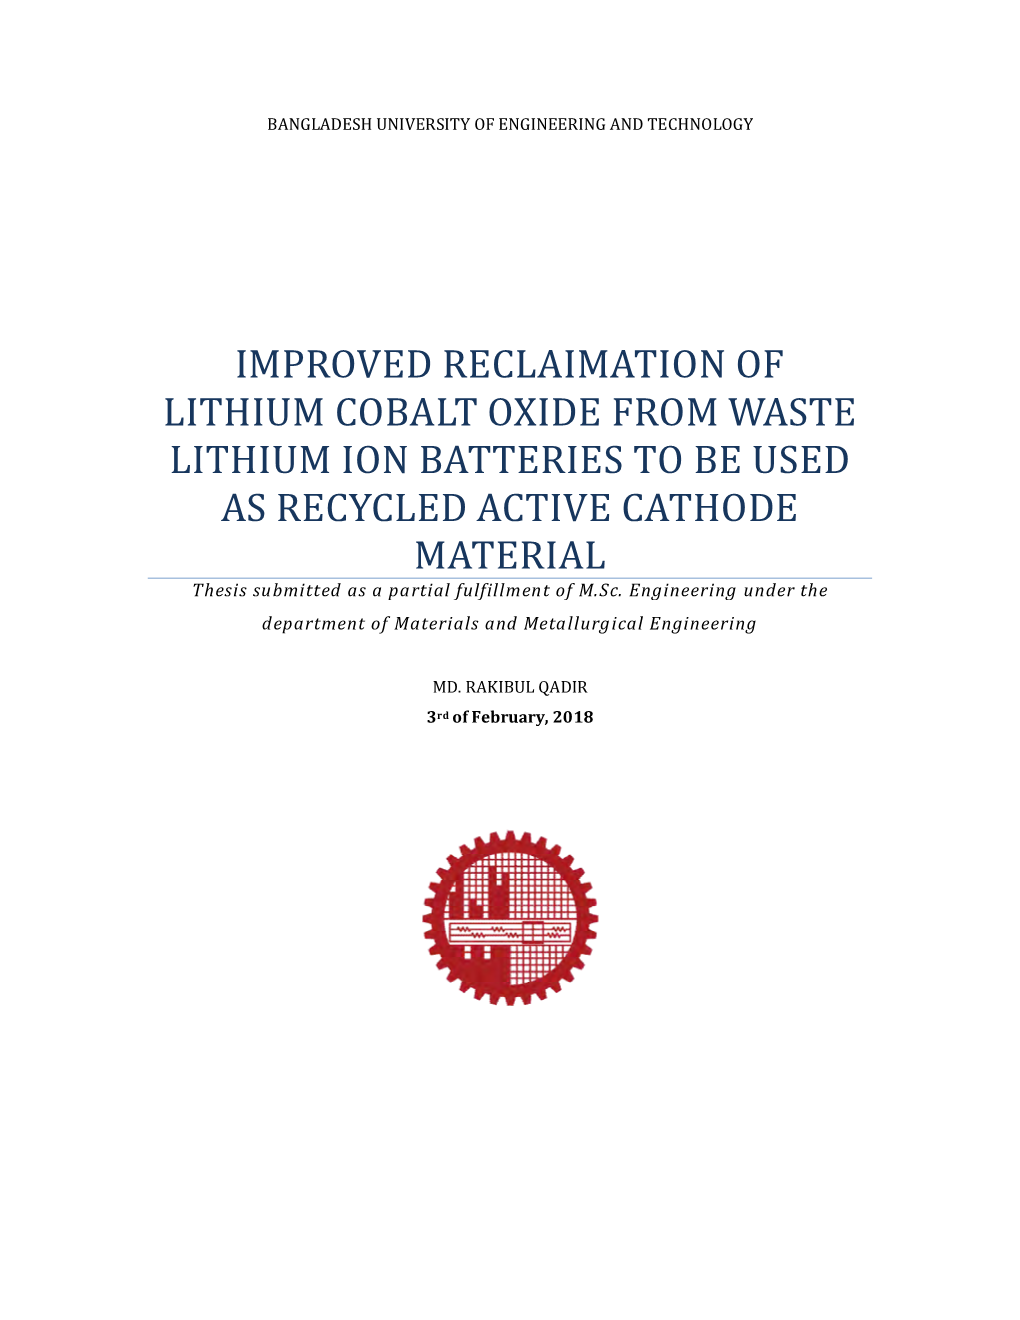 Improved Reclaimation of Lithium Cobalt Oxide from Waste Lithium Ion Batteries to Be Used As Recycled Active Cathode Material